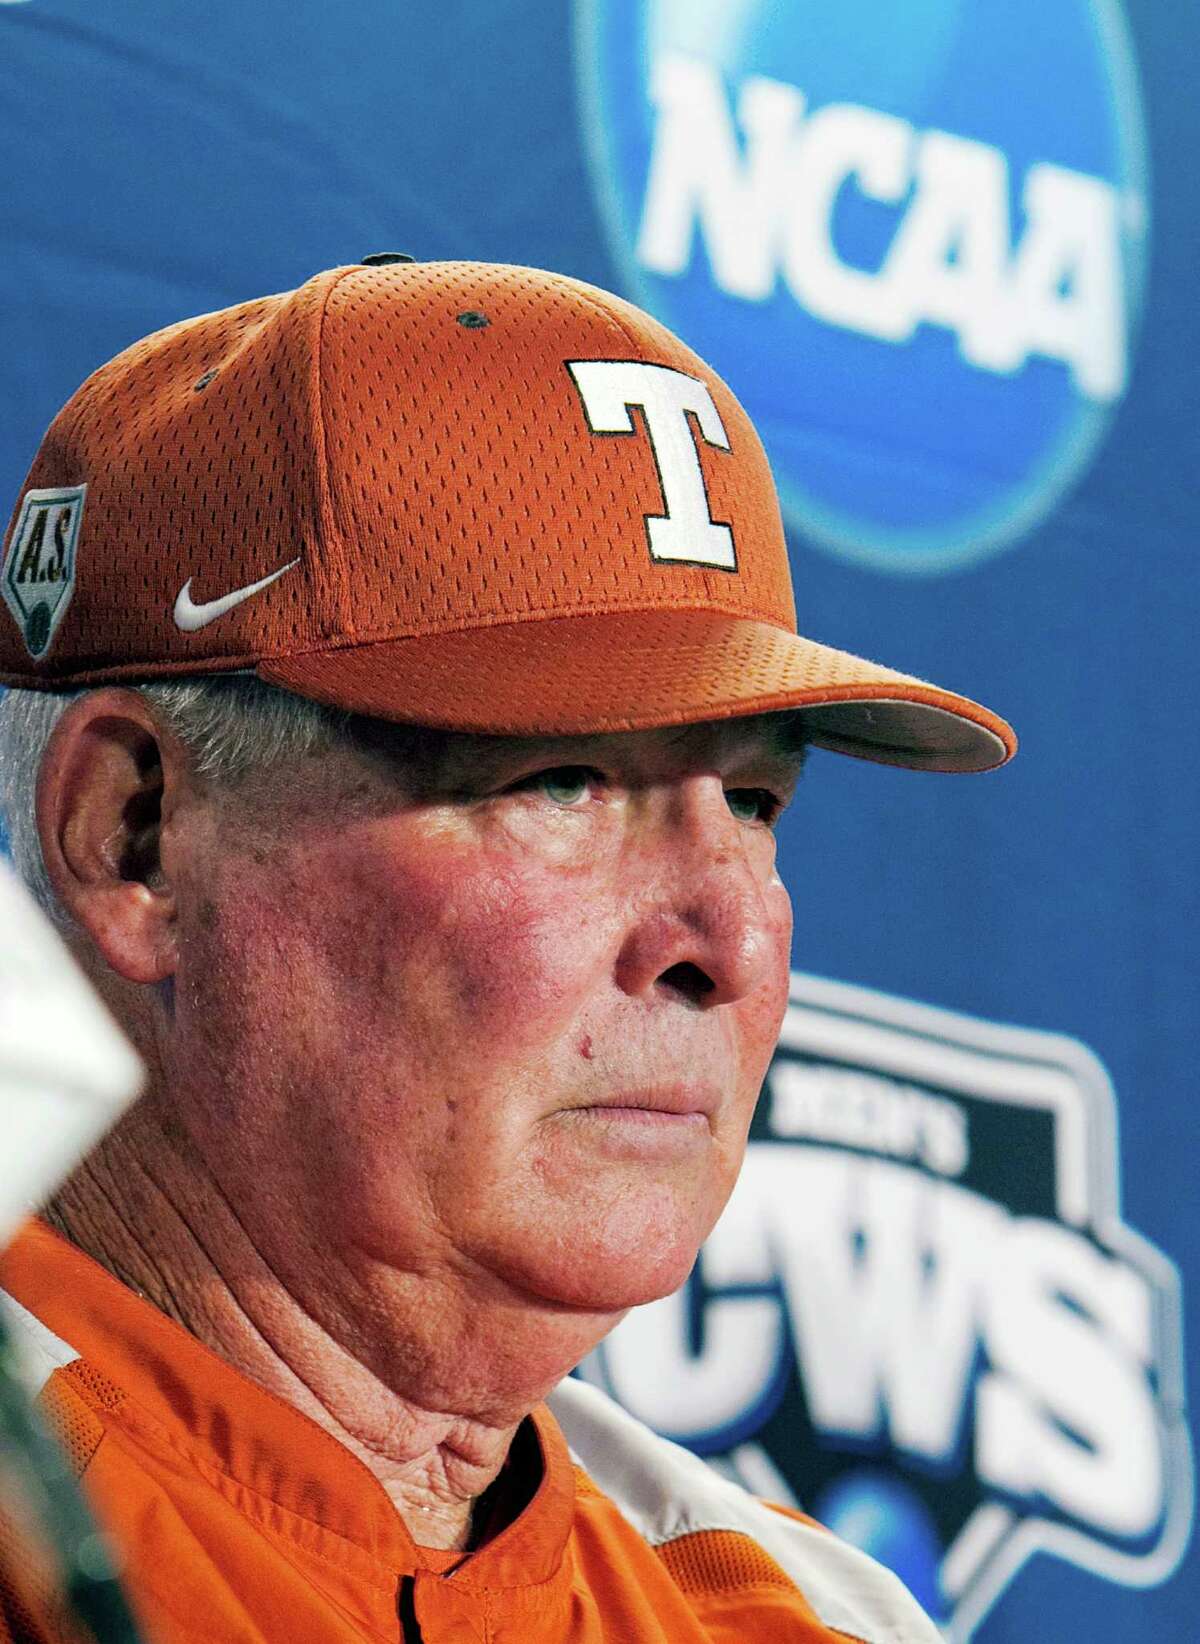 FILE- In this June 17, 2011, file photo, Texas coach Augie Garrido takes a question during an NCAA college baseball news conference at TD Ameritrade Park in Omaha, Neb.Garrido, the winningest coach in college baseball history, is out after 20 seasons at Texas. The decision Monday, May 30, 2016, comes after the Longhorns' first losing season since 1998. (AP Photo/Nati Harnik, File)